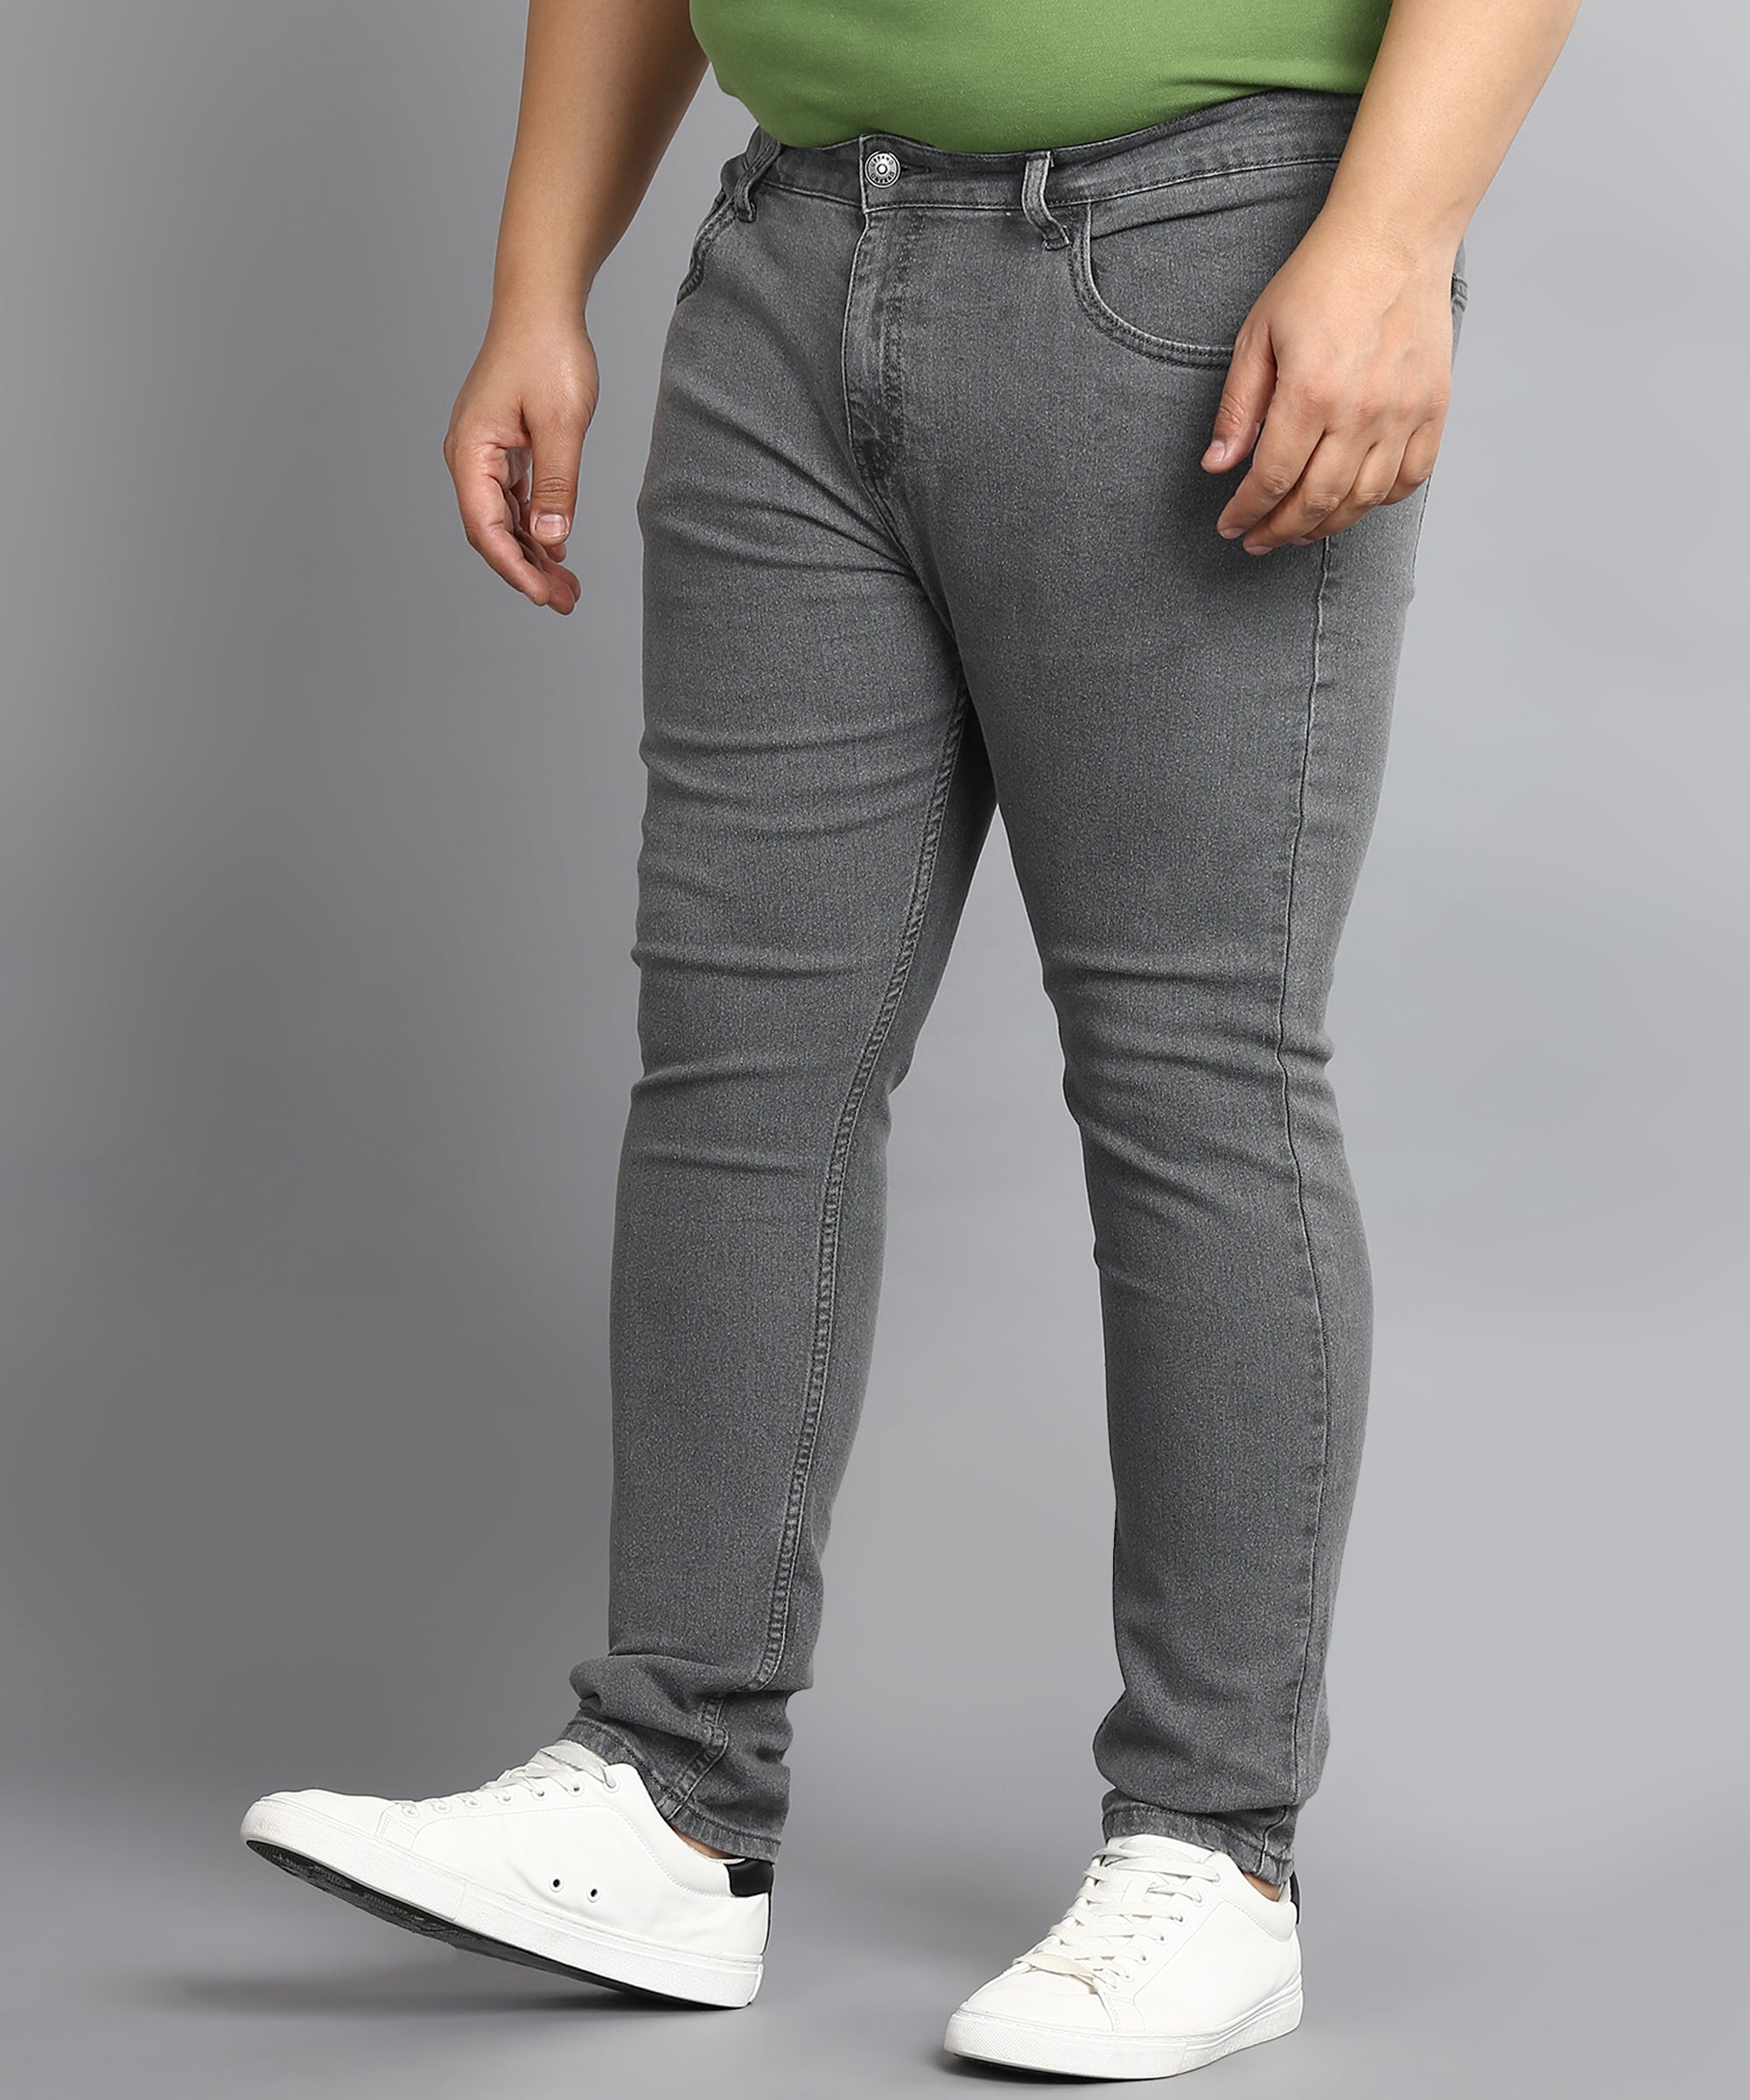 Urbano Plus Men's Grey Regular Fit Washed Jeans Stretchable